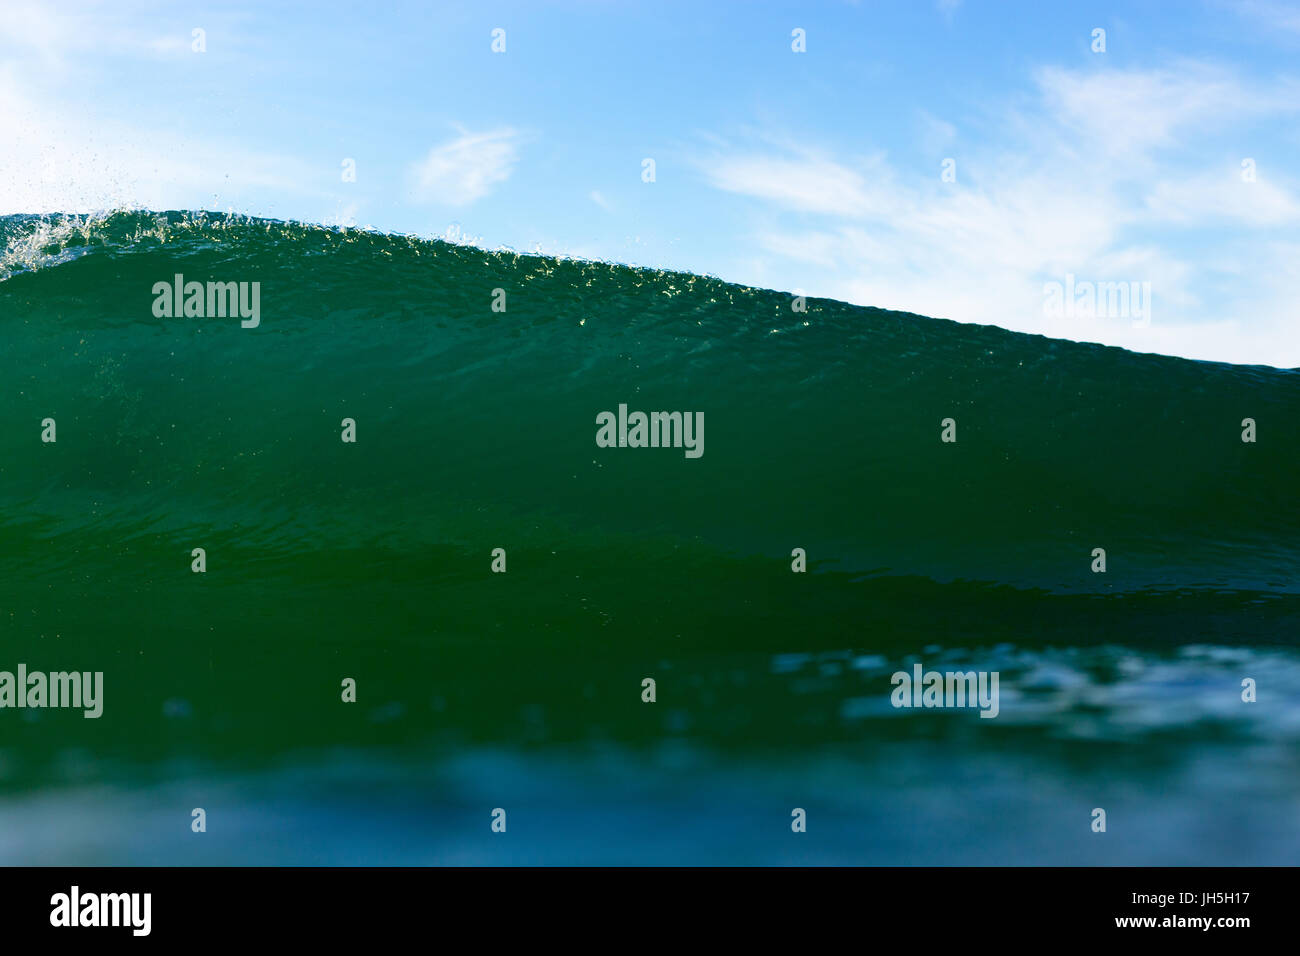 An abstract water angle of an emerald, powerful breaking wave on a bright summer day. Stock Photo